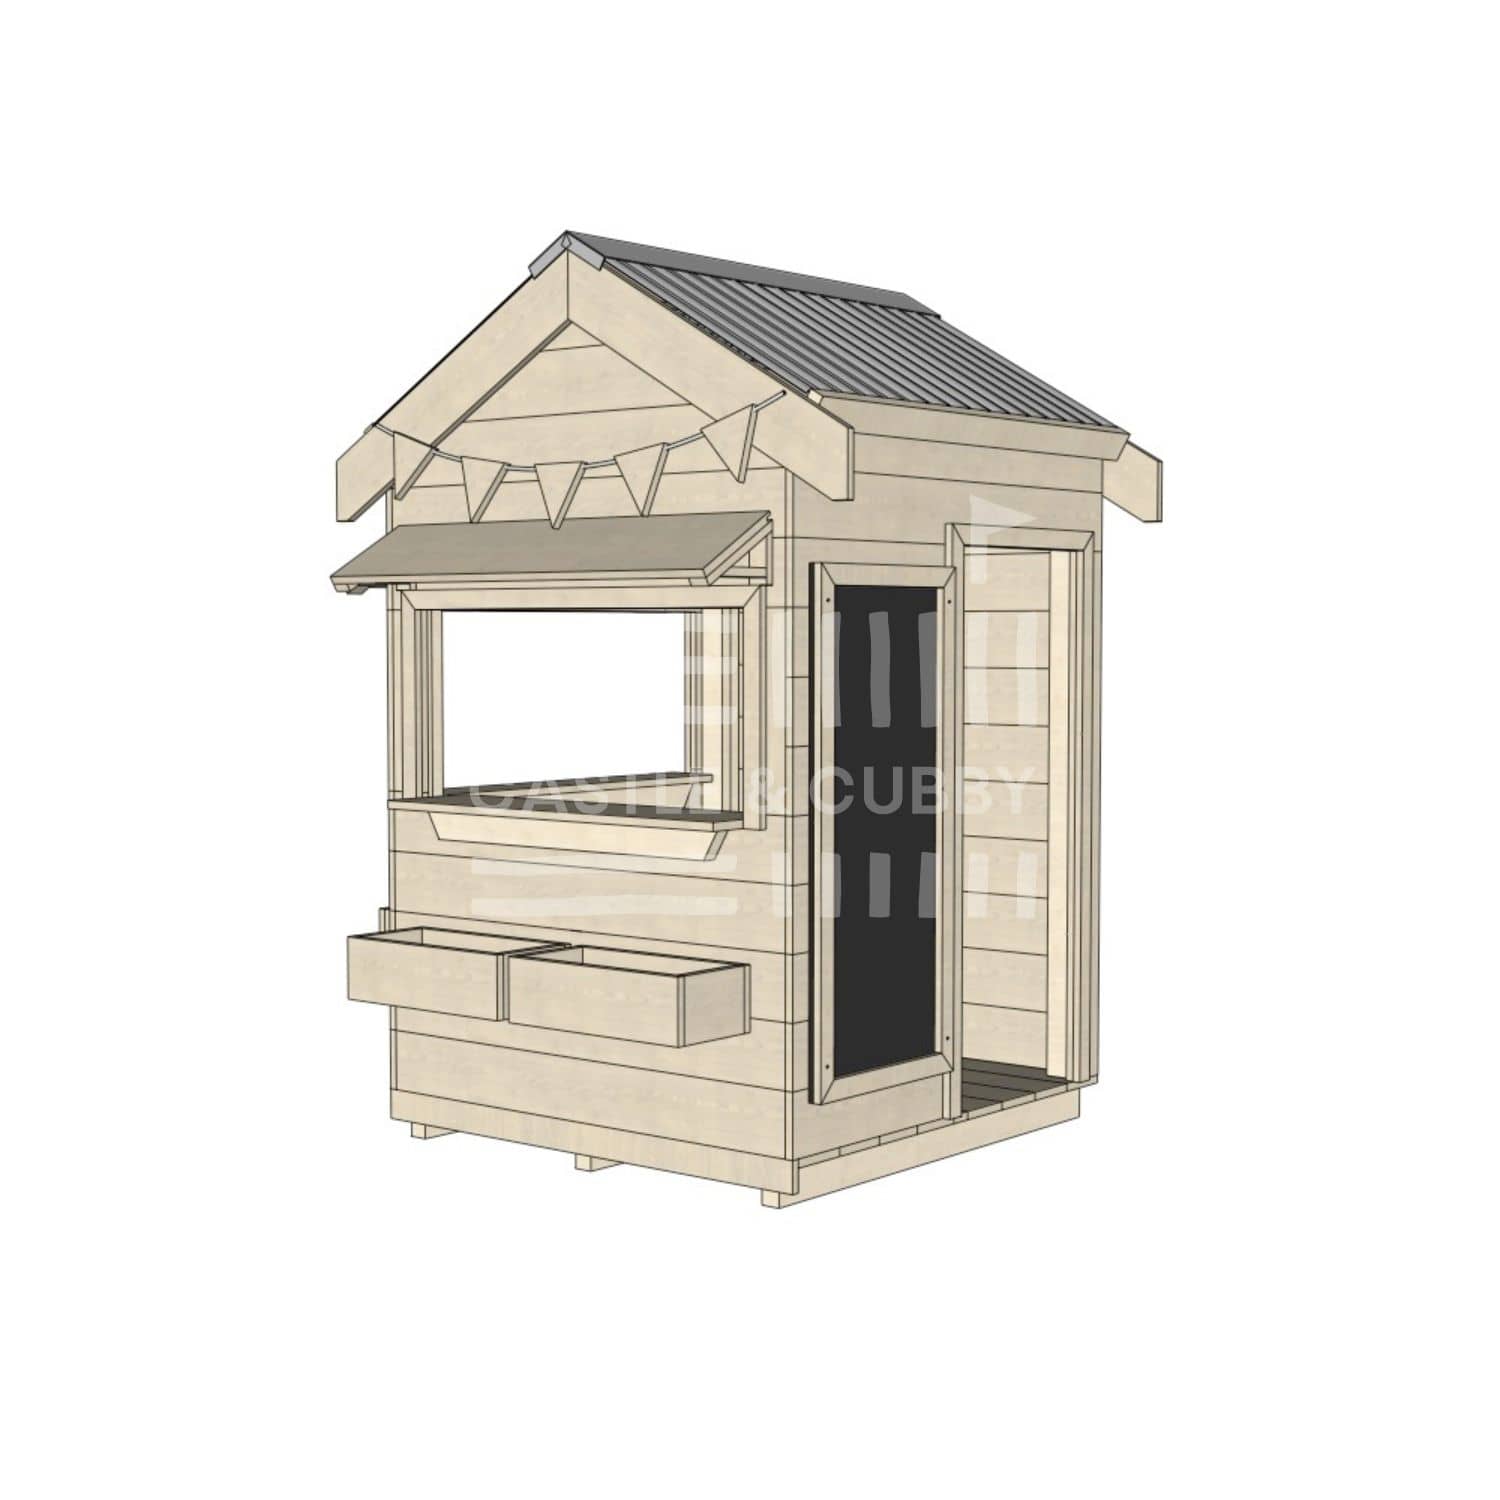 Pitched roof raw wooden cubby house commercial education little square accessories